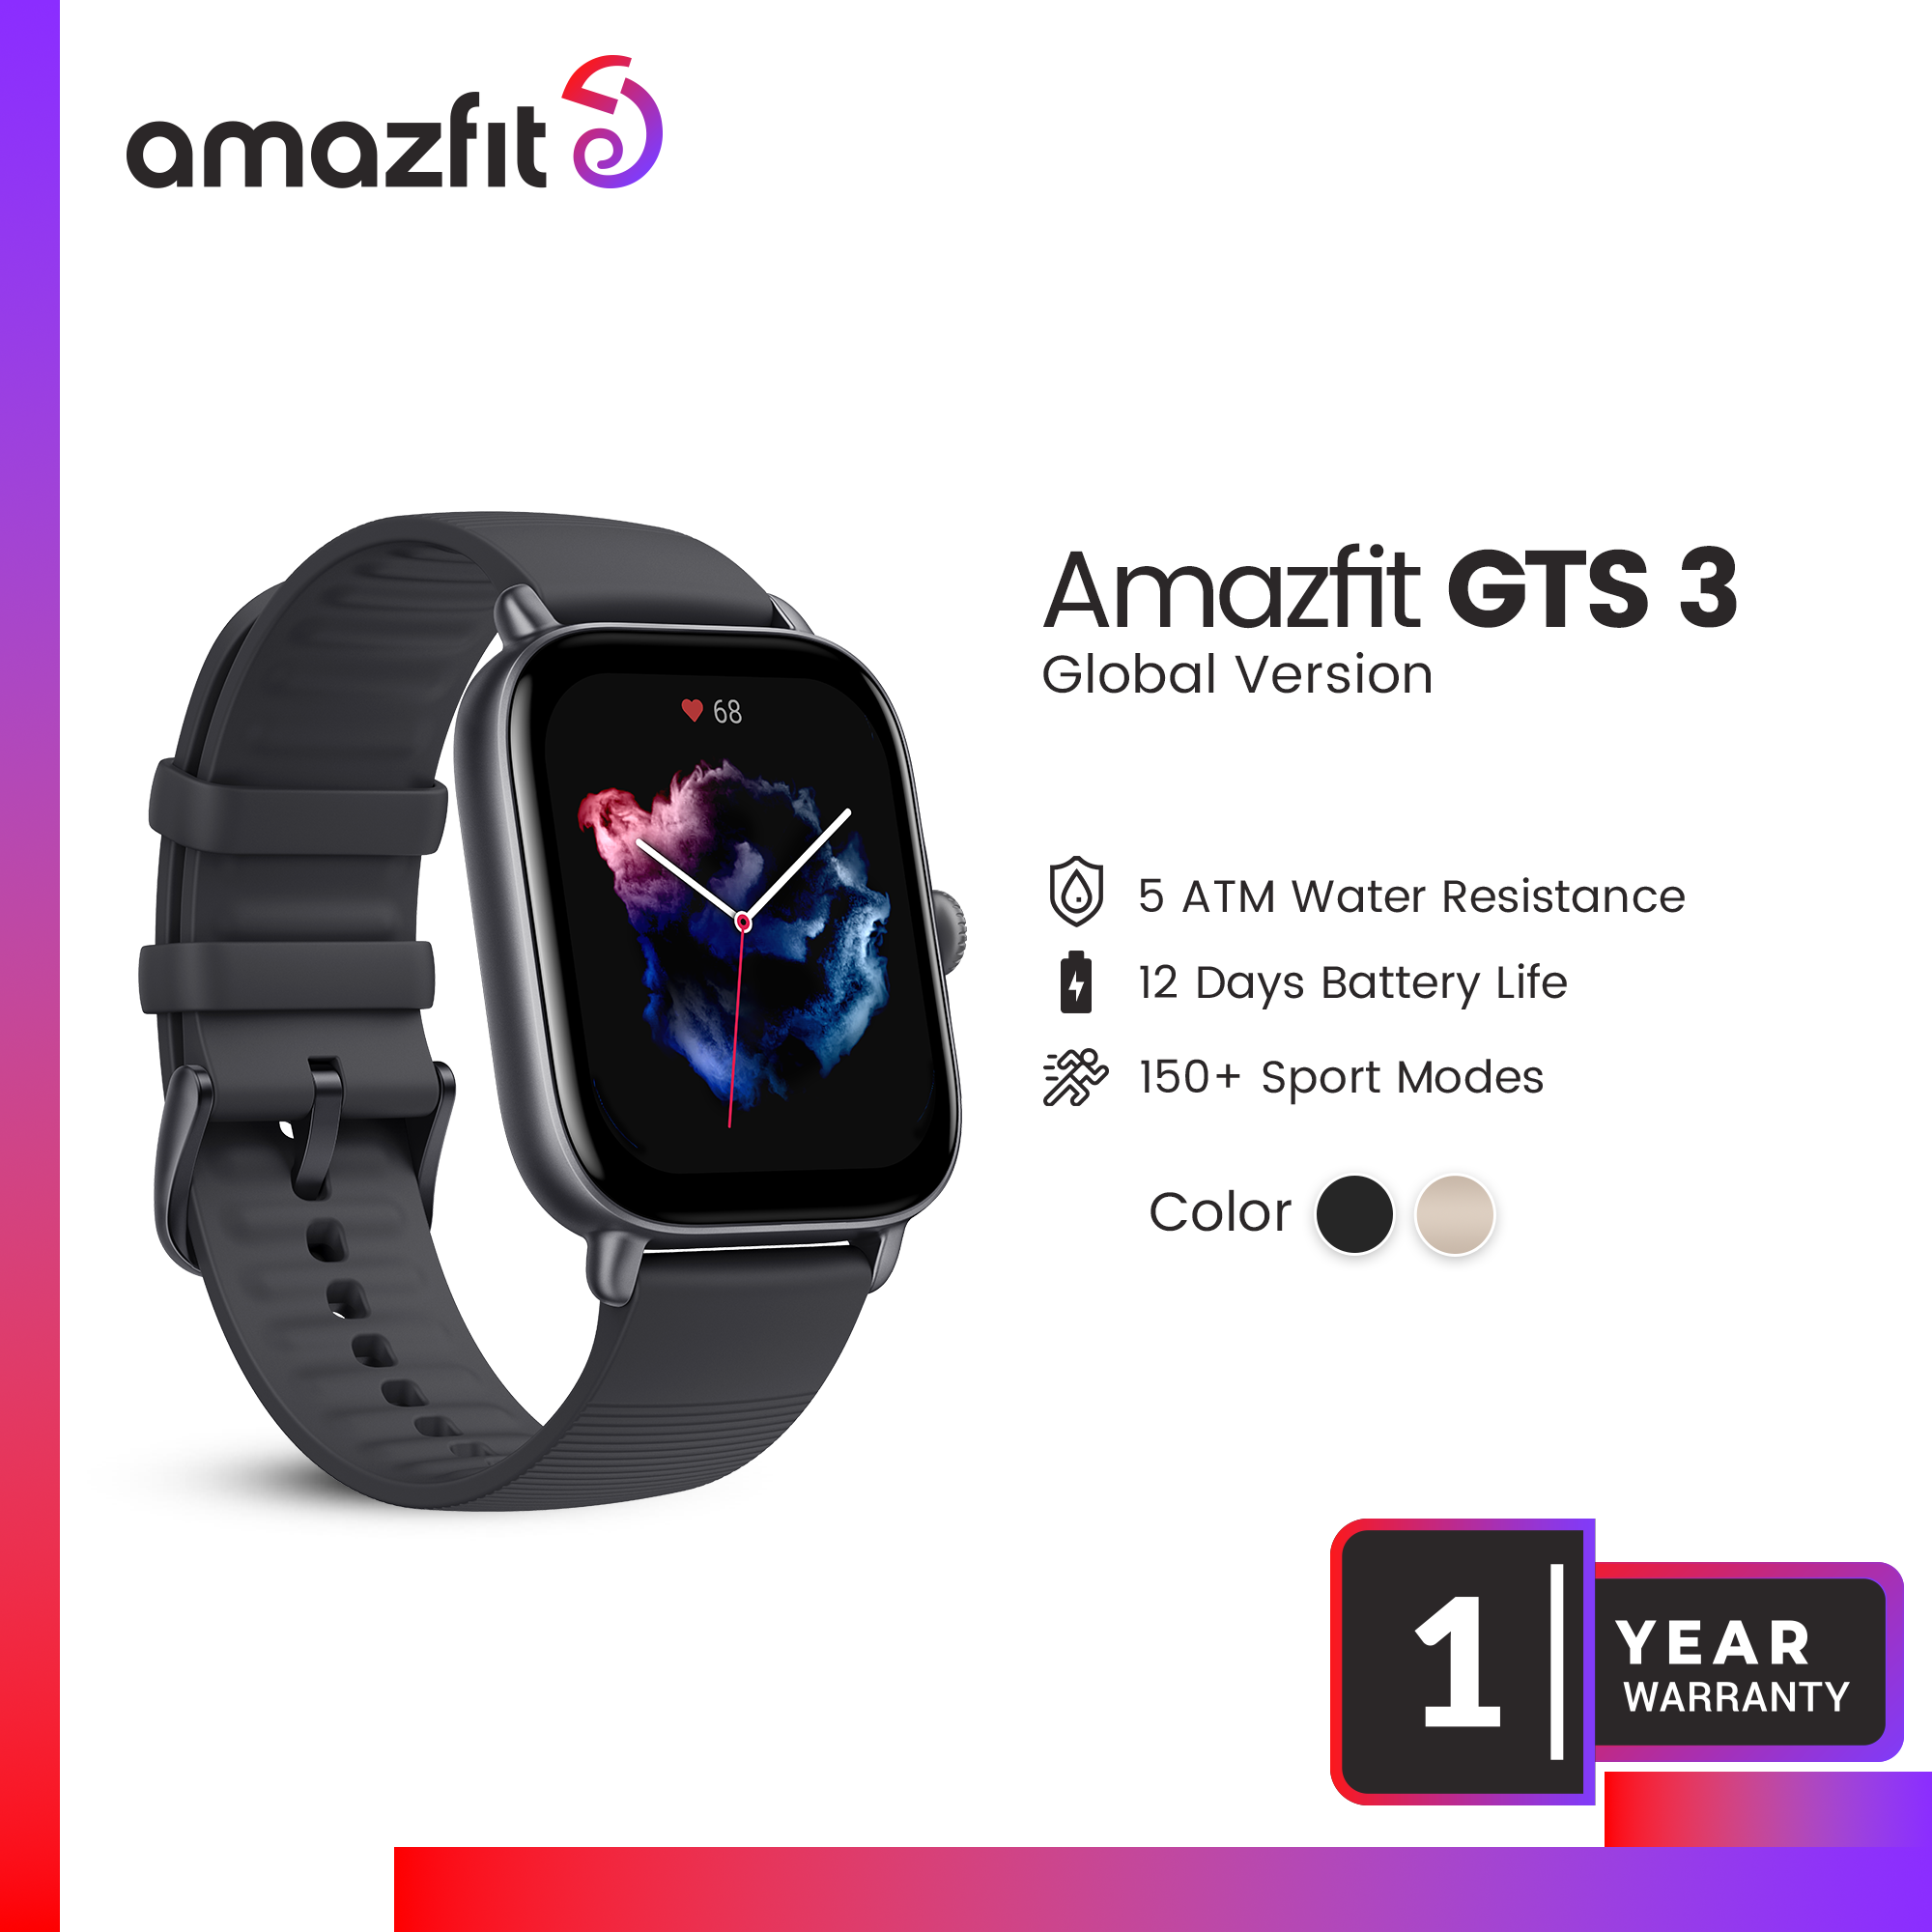 Amazfit GTS 2 official: Premium smart watch with low weight